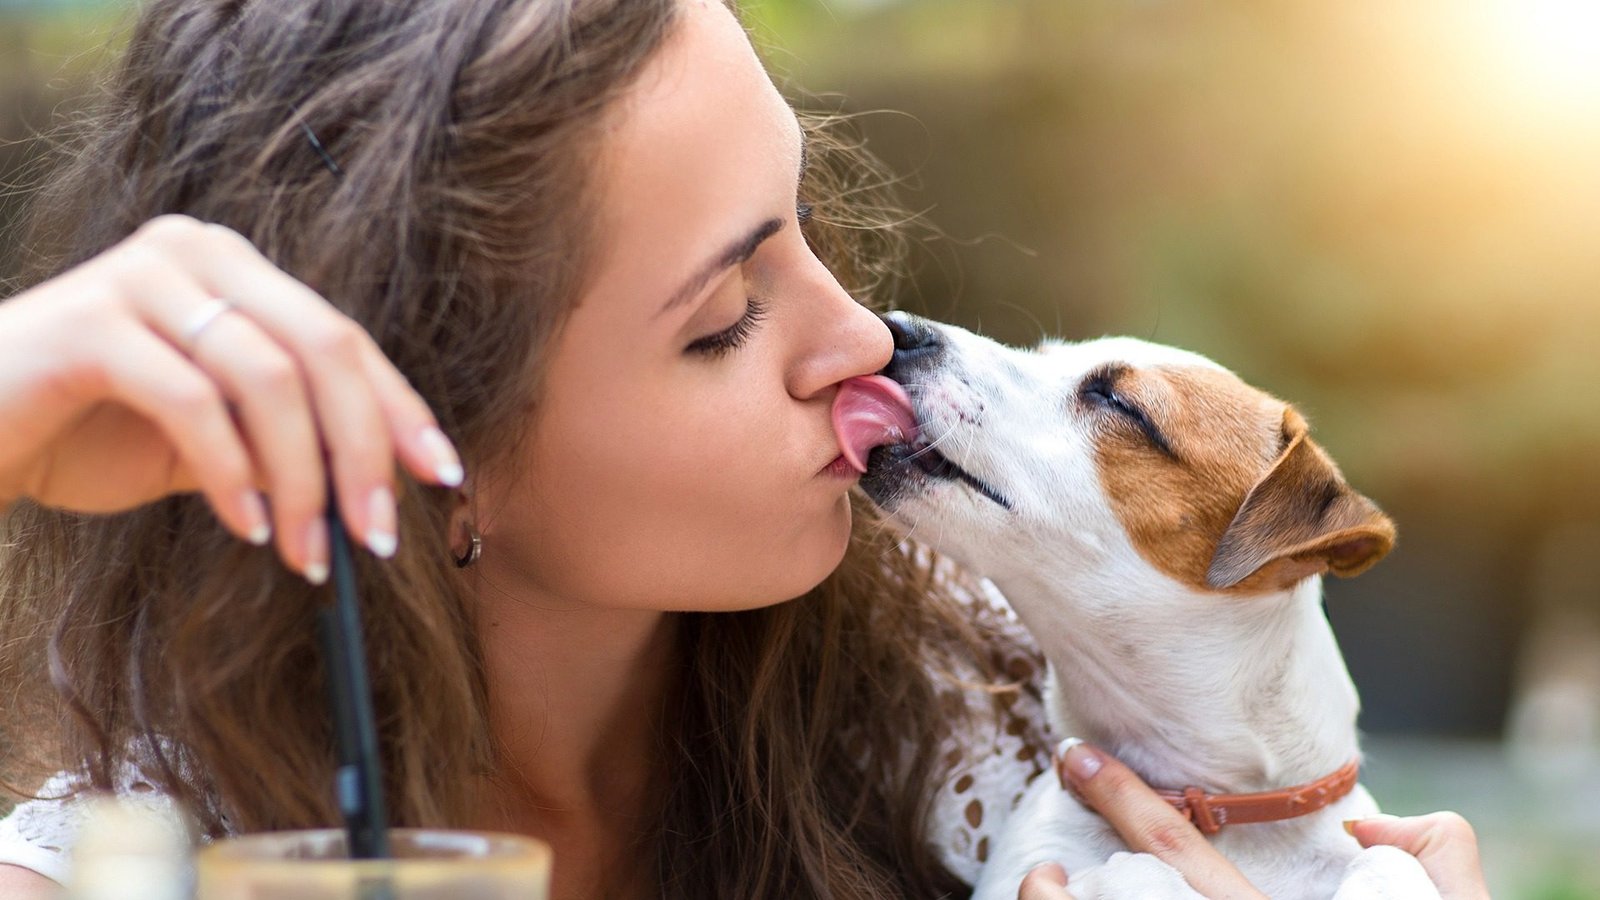 limit direct contact with a dog's mouth to minimize the risk of potential infections